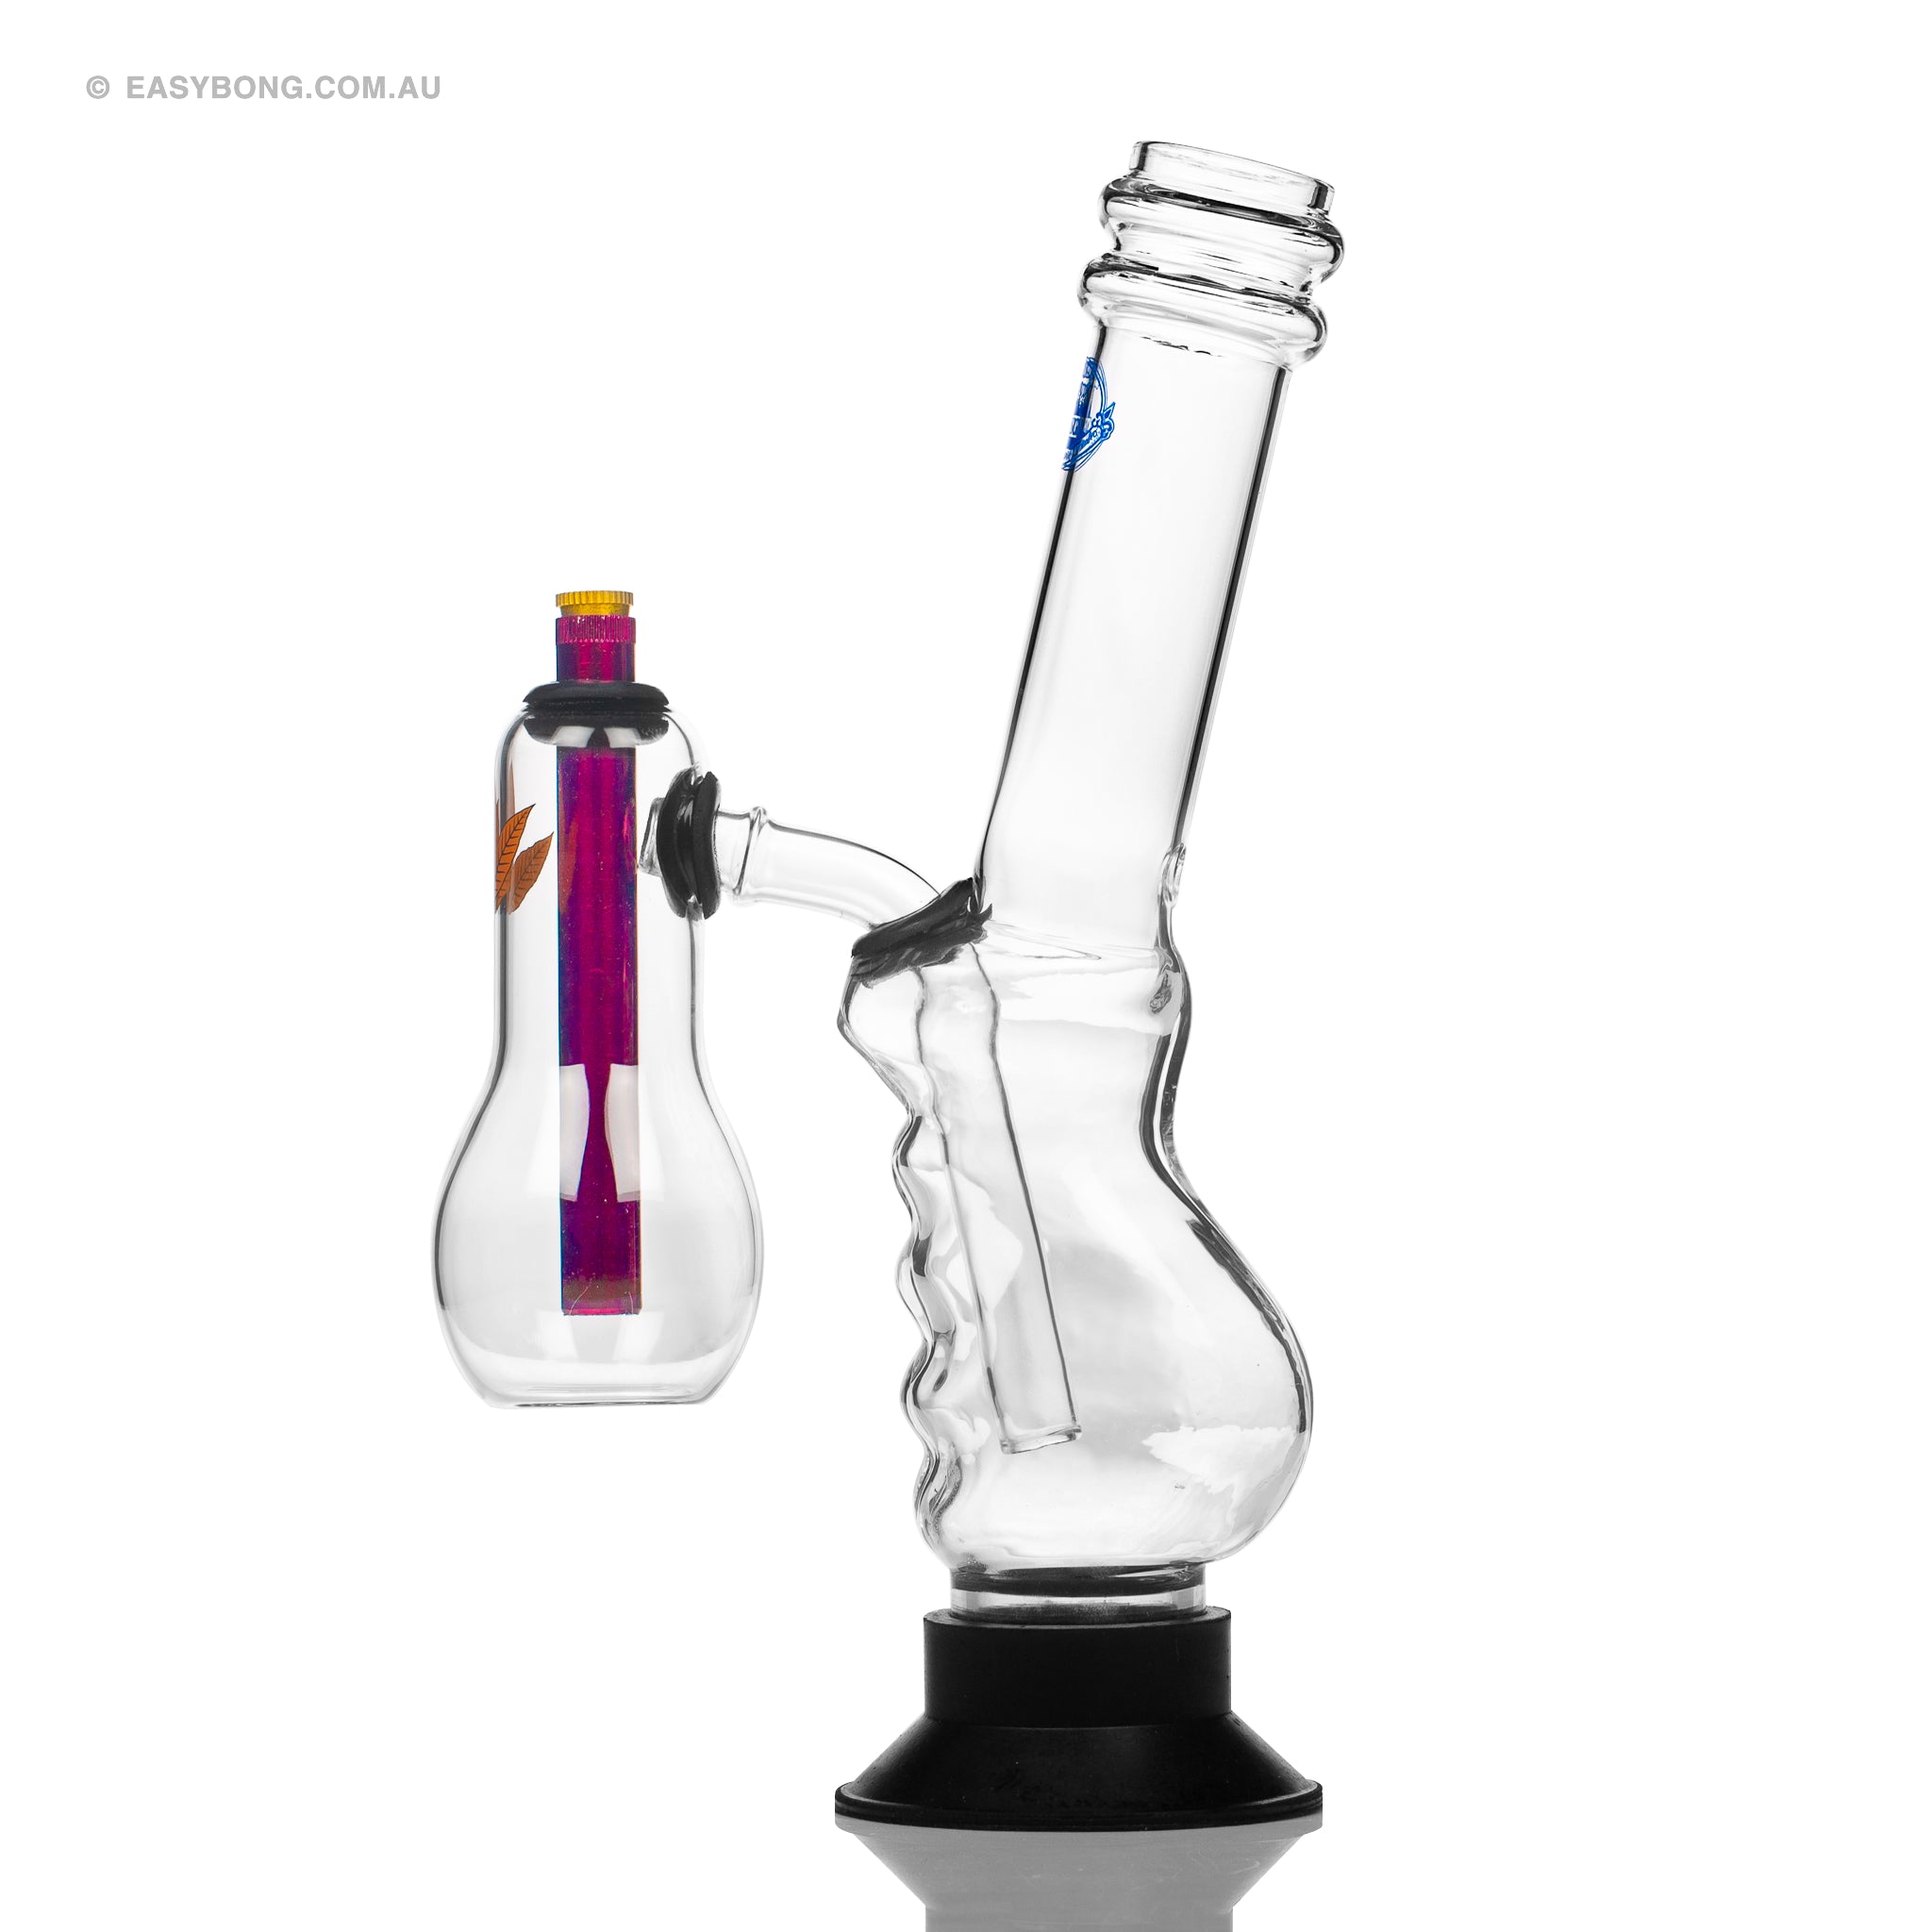 Larger size Agung Aussie style double chamber bong.